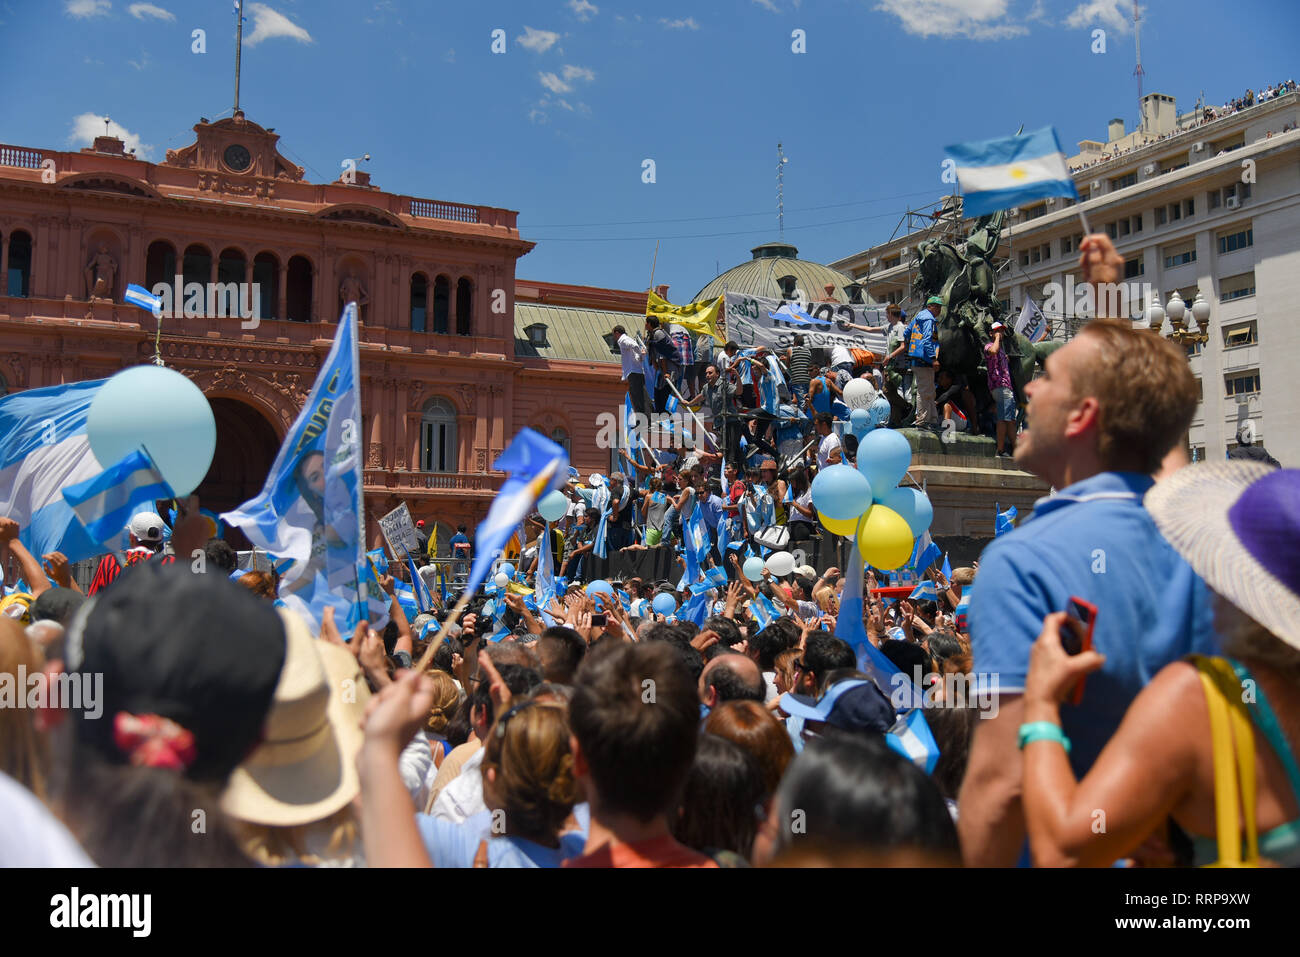 Buenos Aires, Argentina - Dec 10, 2015: Supporters of the newly elected Argentinean president wave flags on inauguration day at the Plaza de Mayo. Stock Photo